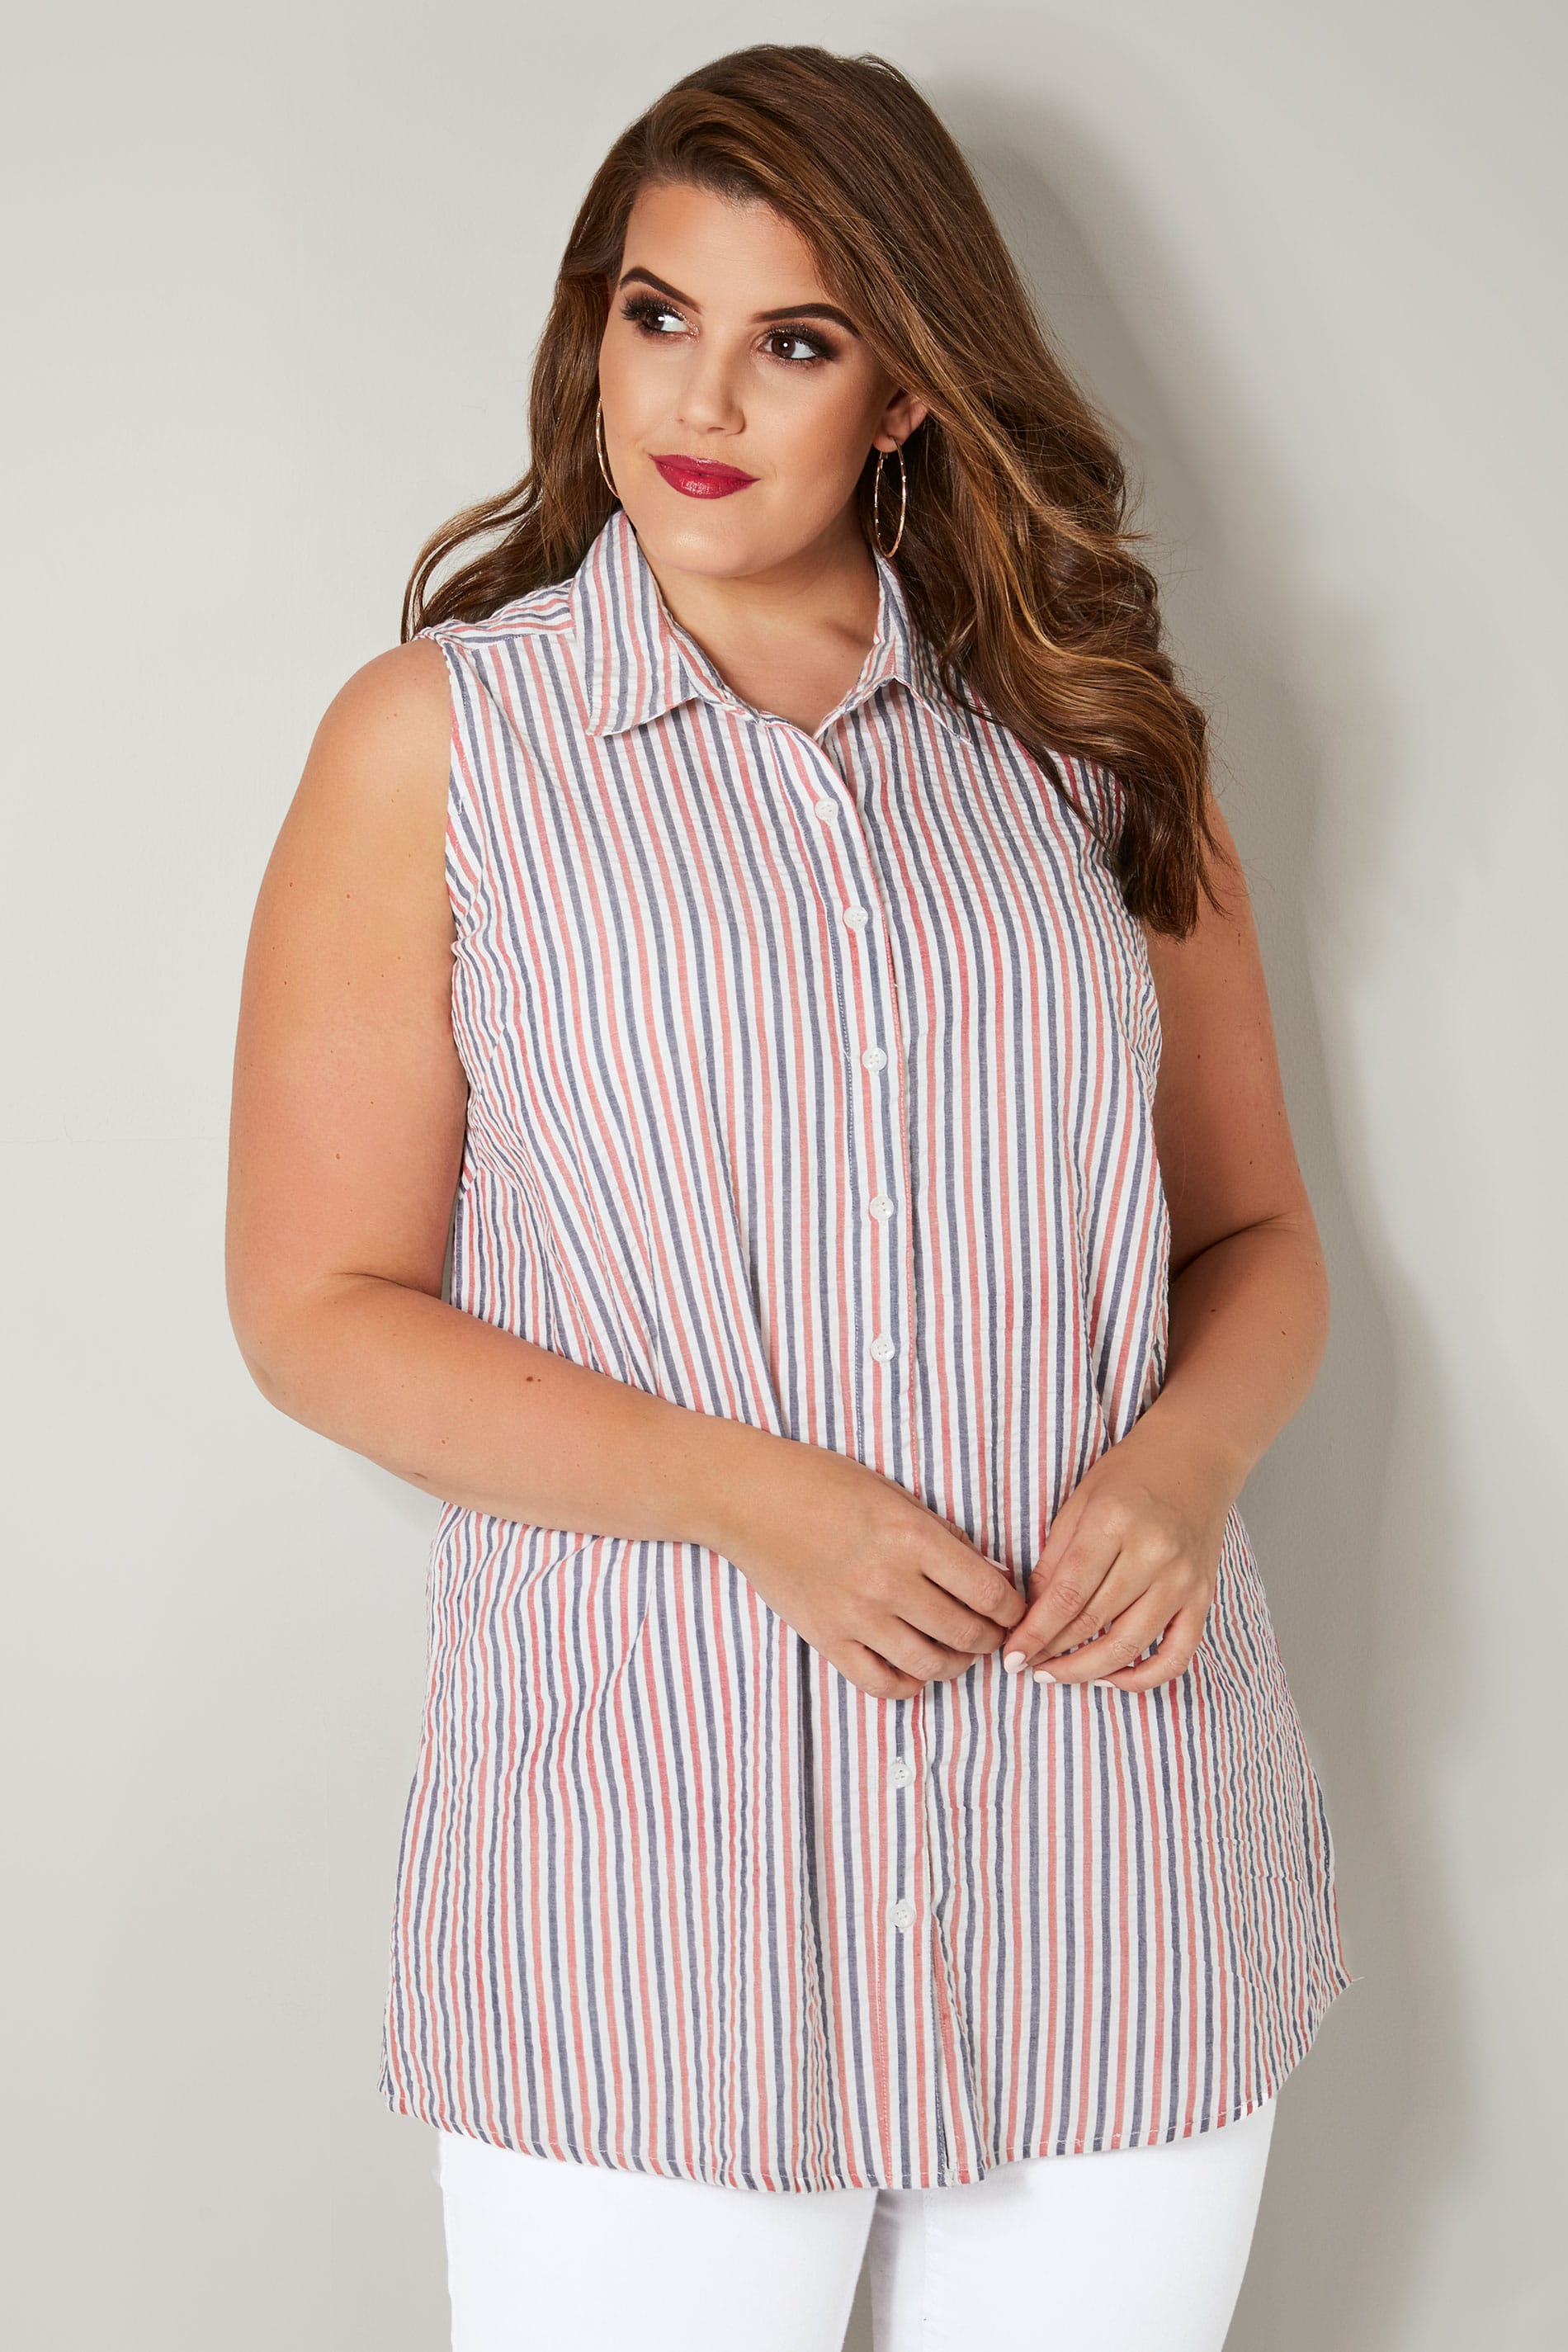 Red & Blue Striped Sleeveless Shirt, plus size 16 to 32